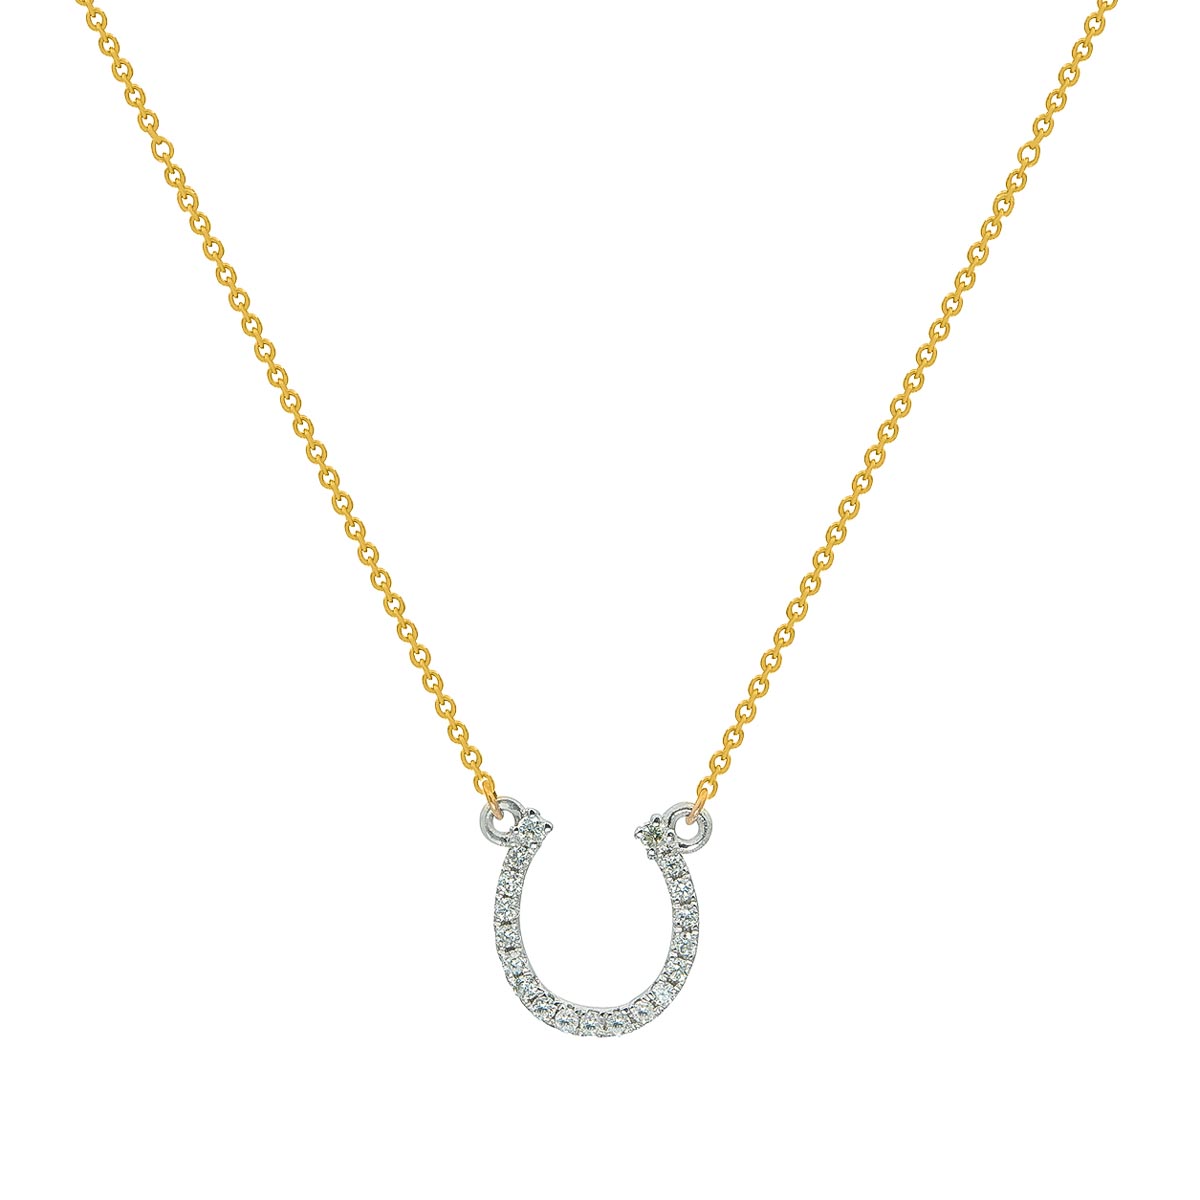 Classic Good Luck Horseshoe Shaped Diamond Pendant with Gold Chain